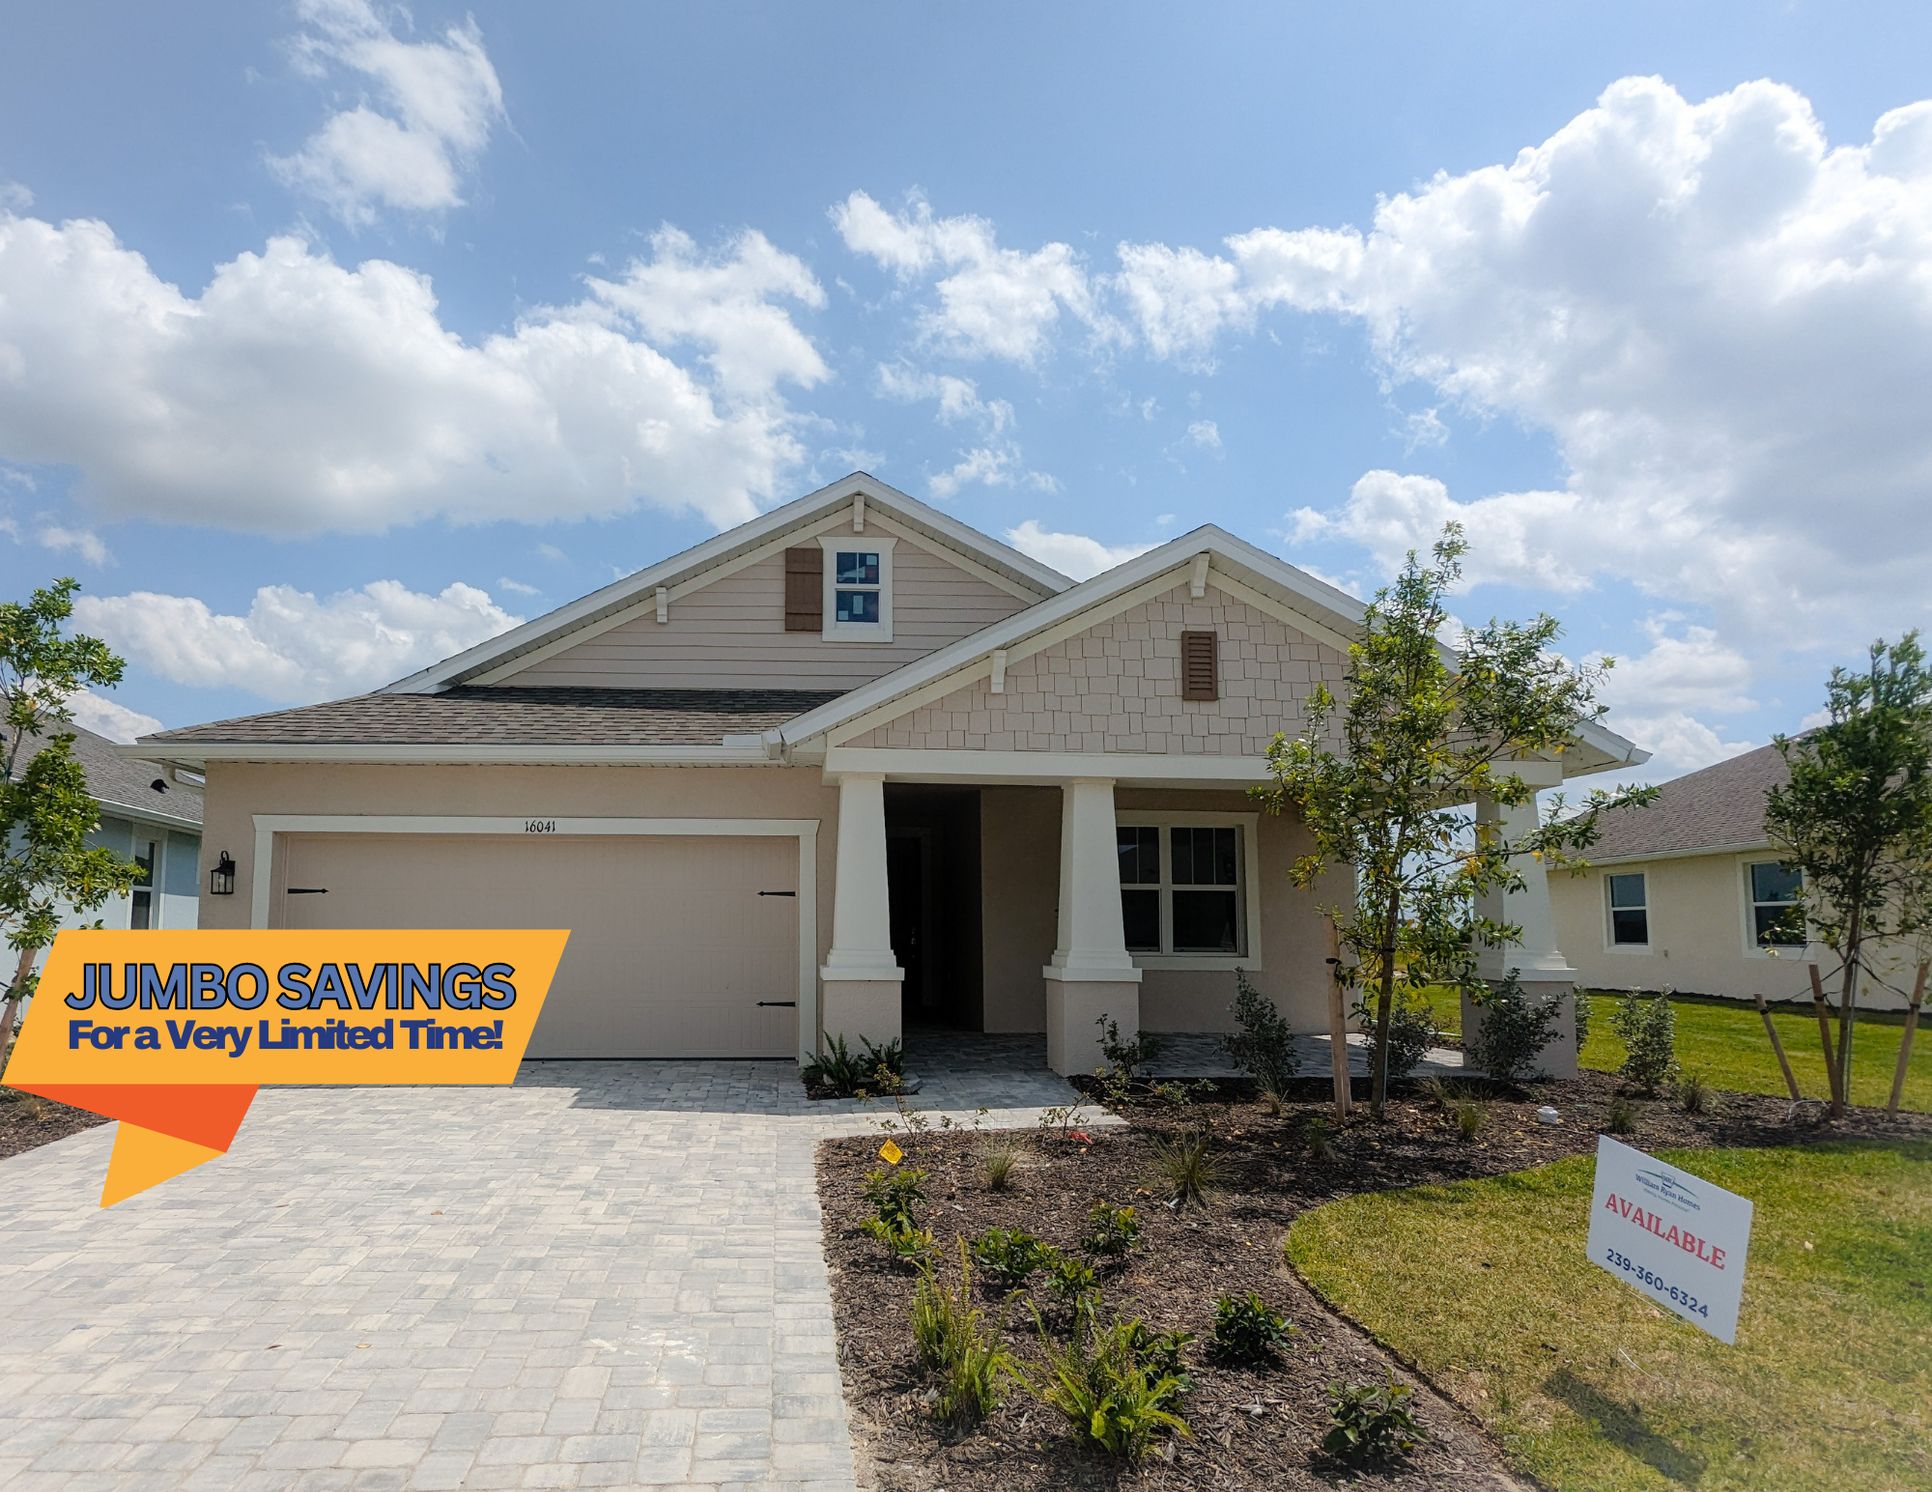 Quick Move-In Home - Sweetwater Floor Plan:Sweetwater Floor Plan- New Home For Sale - Move-In Ready at The Sanctuary at Babcock Ranch Punta Gorda by William Ryan Homes